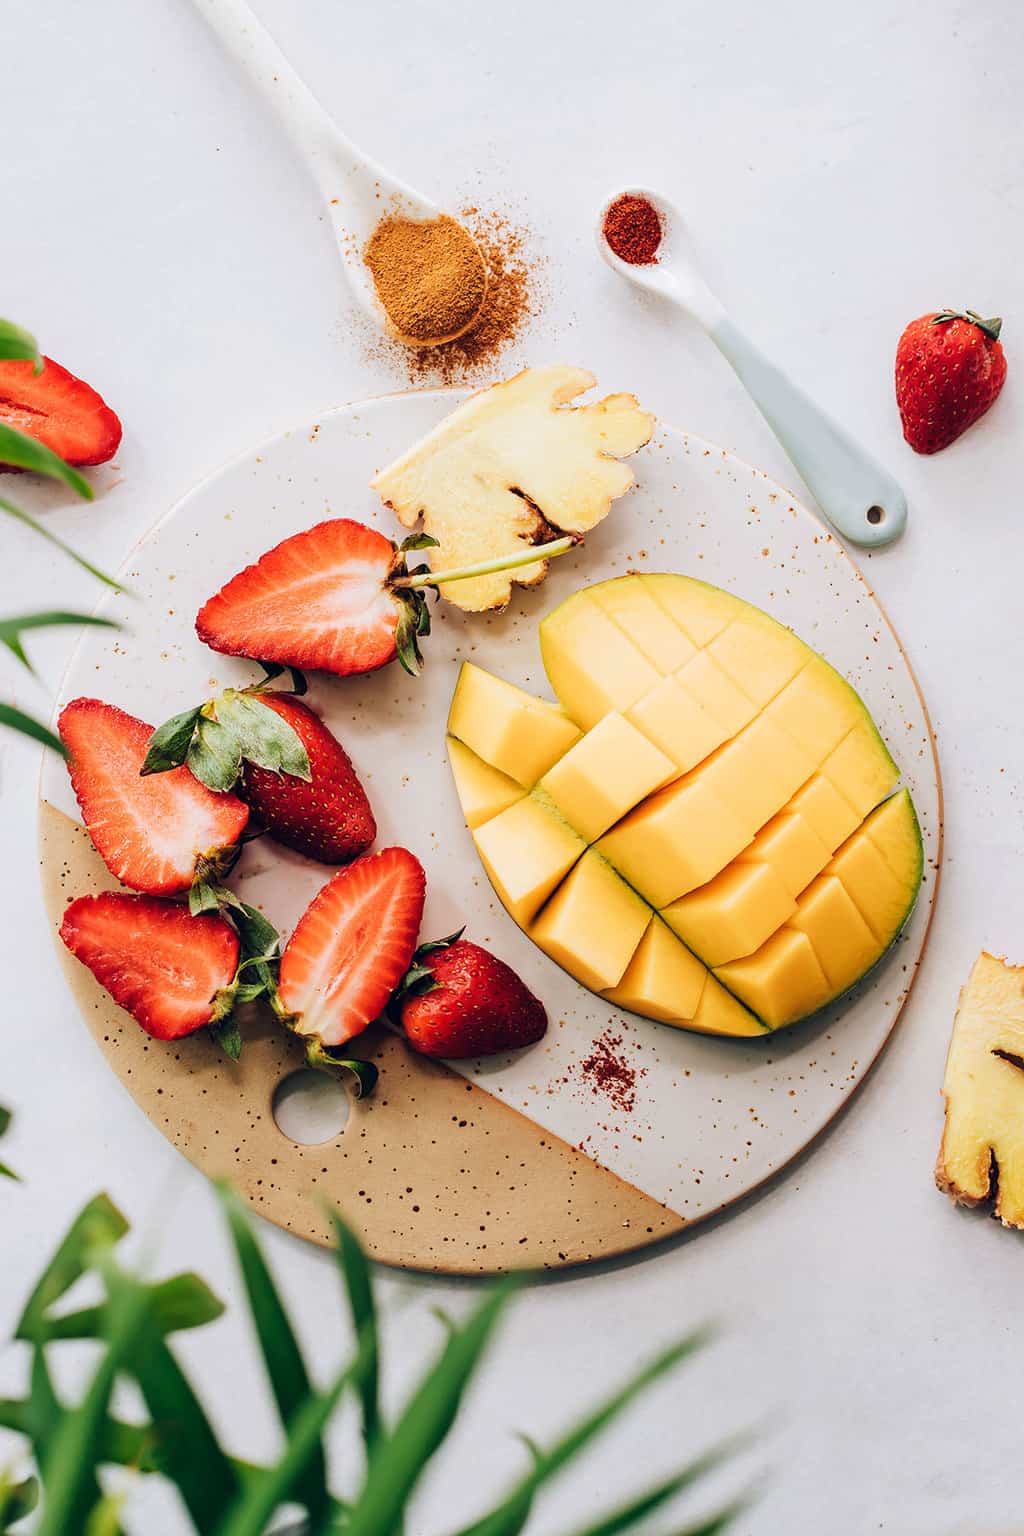 Ingredients for a metabolism-boosting strawberry mango smoothie recipe